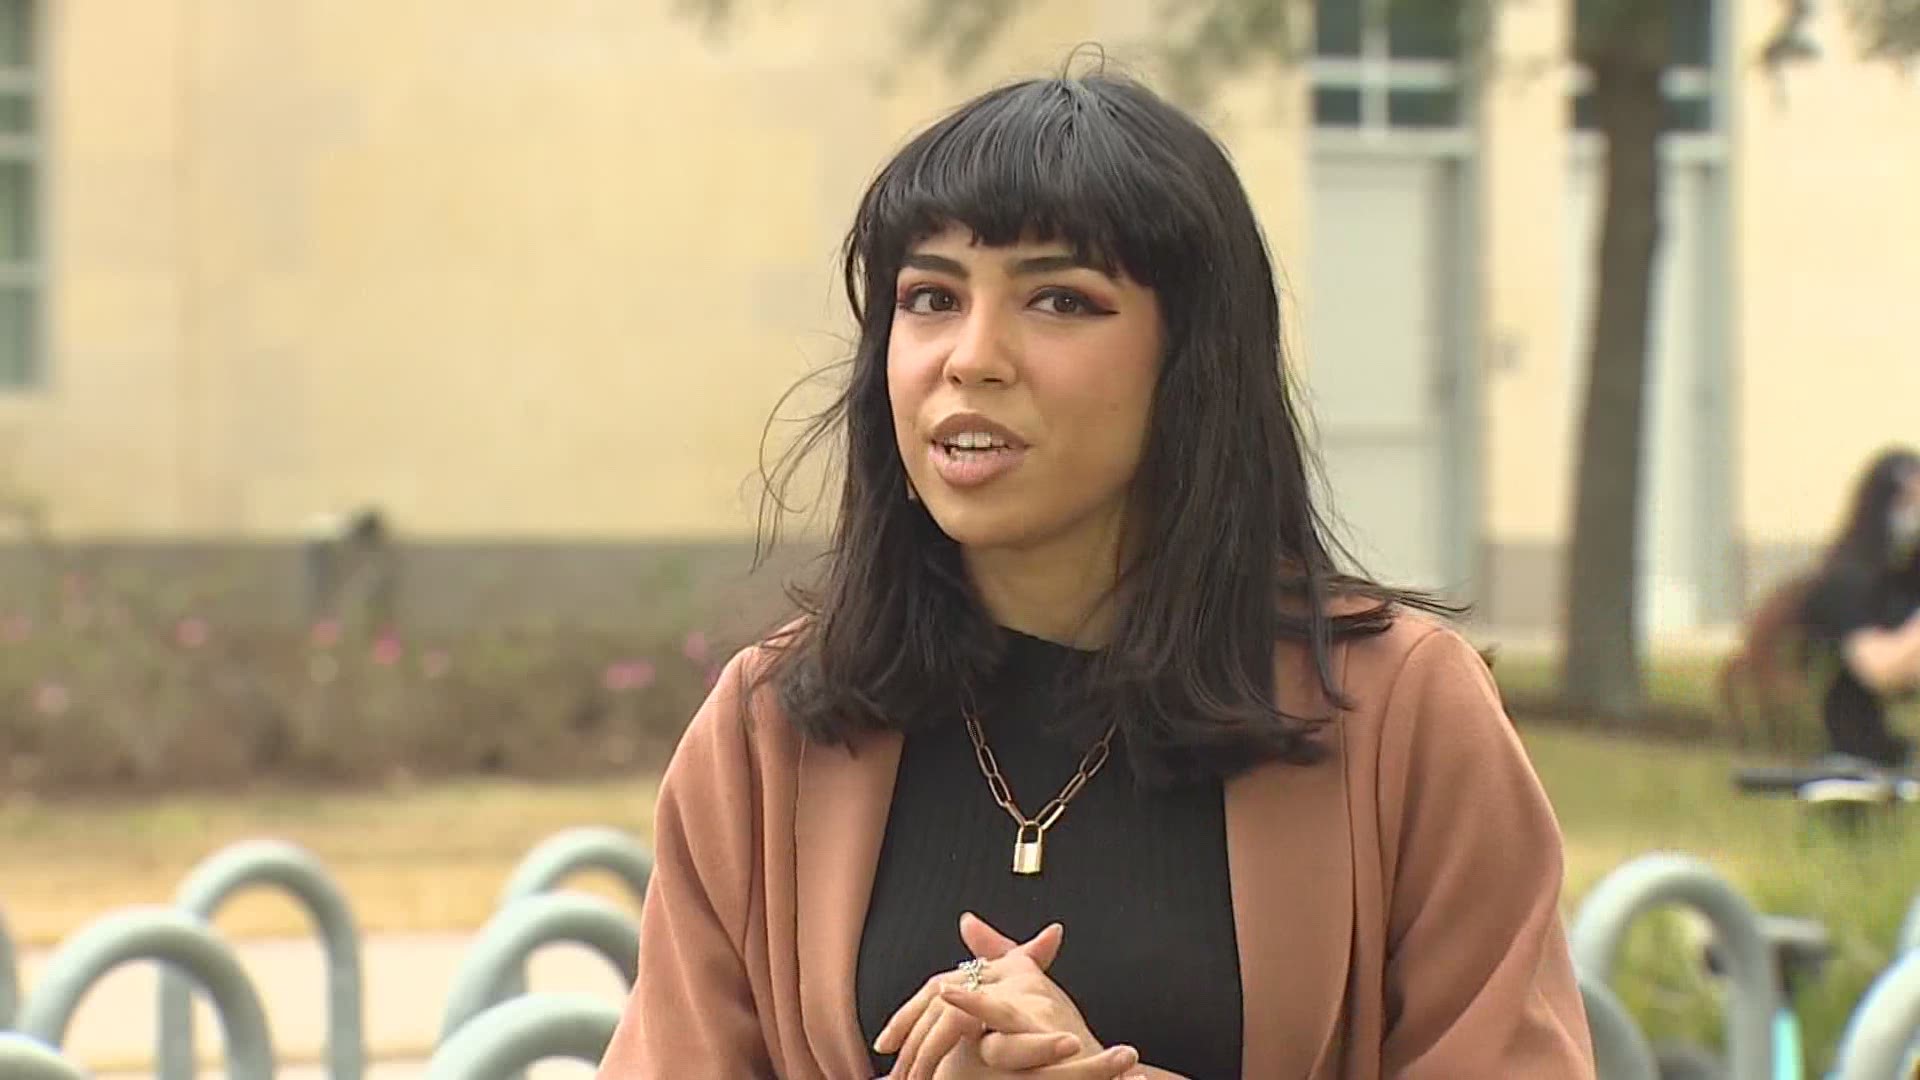 The University of Houston student body president hopes the Joe Biden-Kamala Harris administration delivers some relief when it comes to student loans.